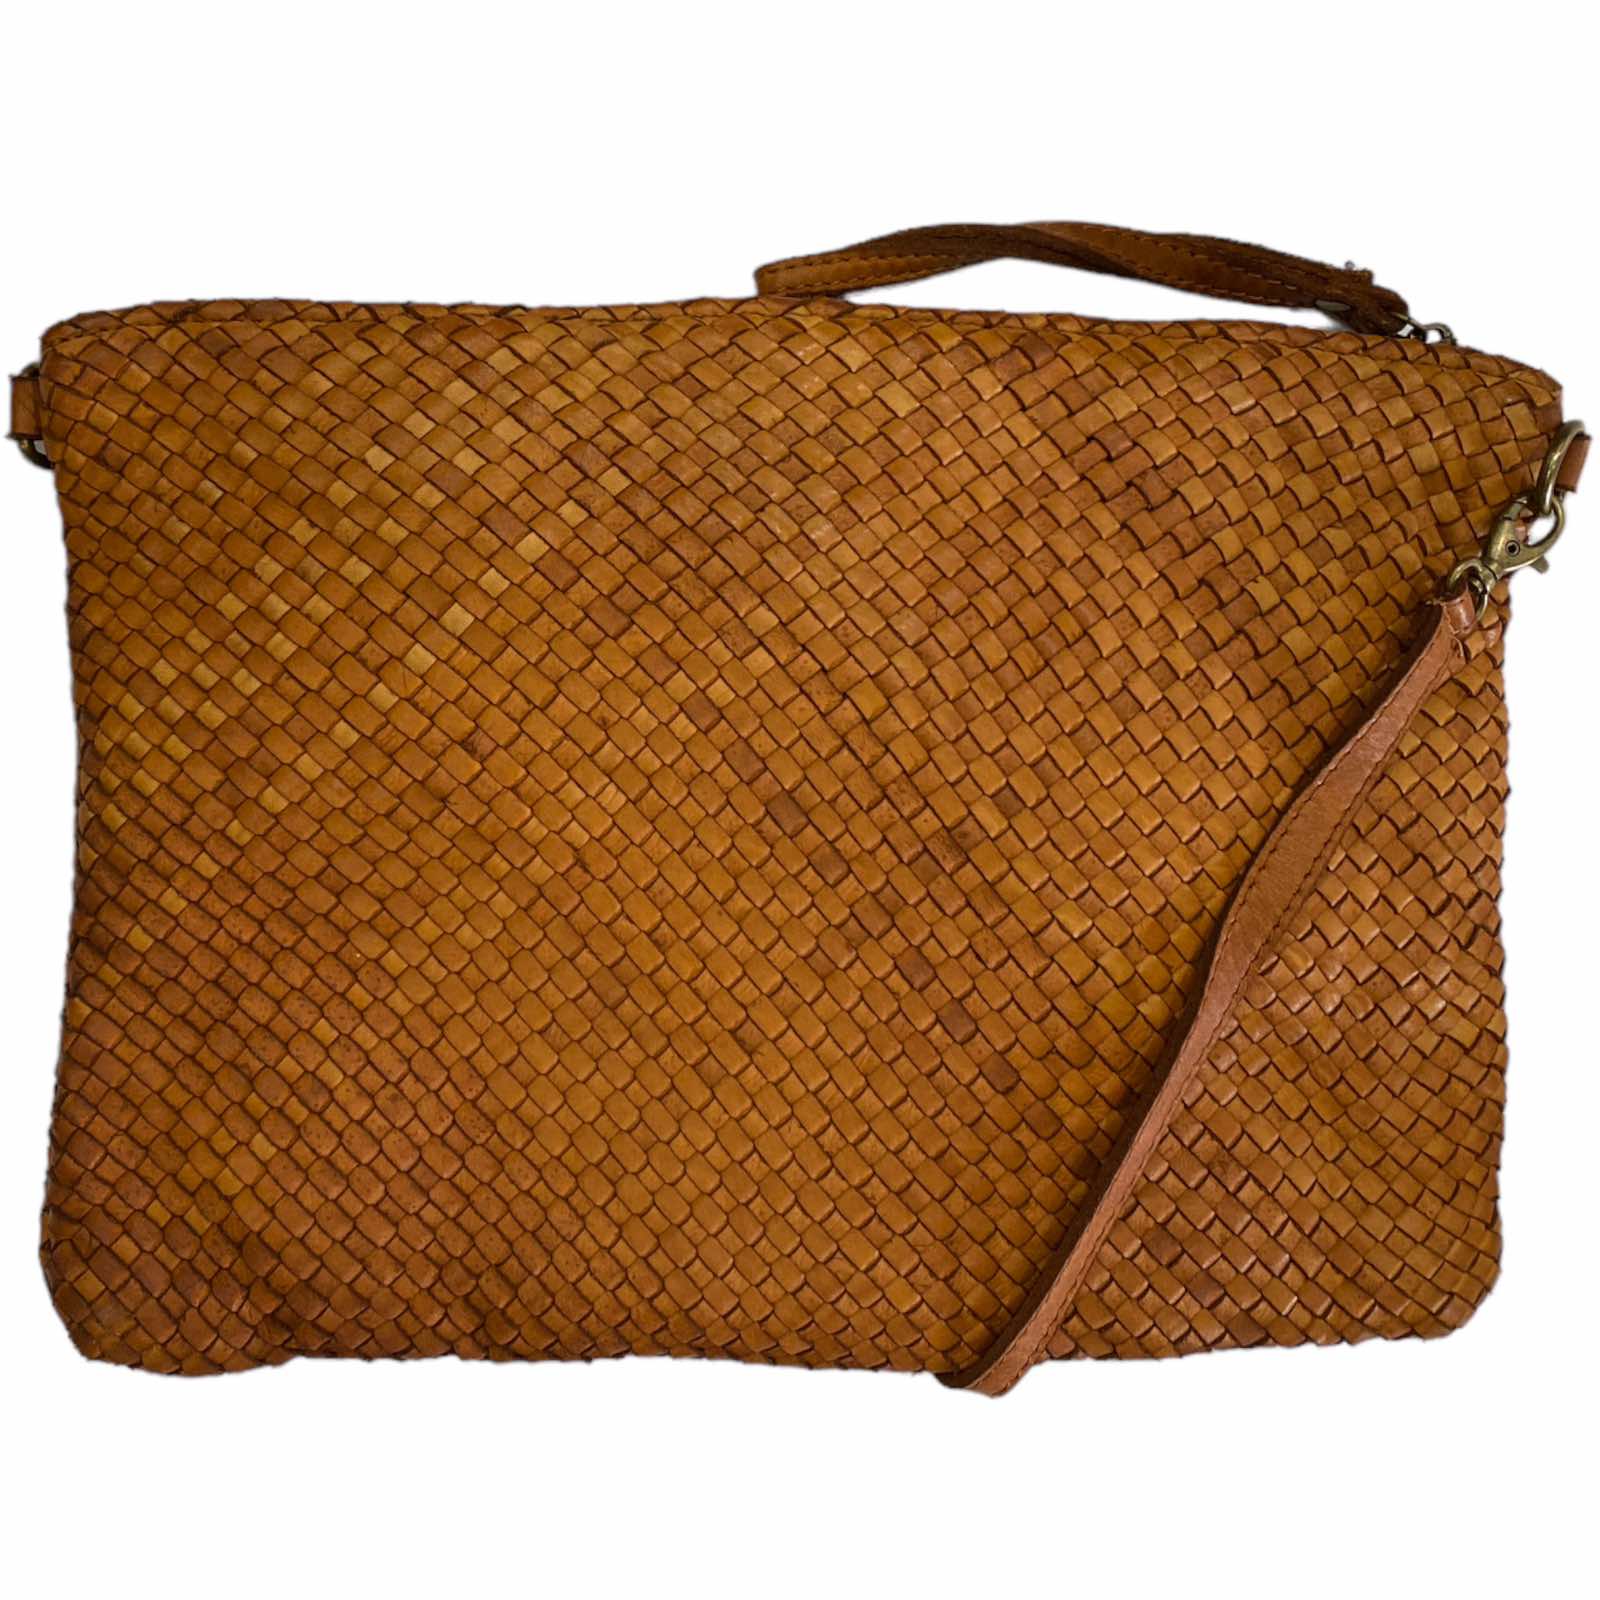 A4 taba handwoven leather clutch and messenger